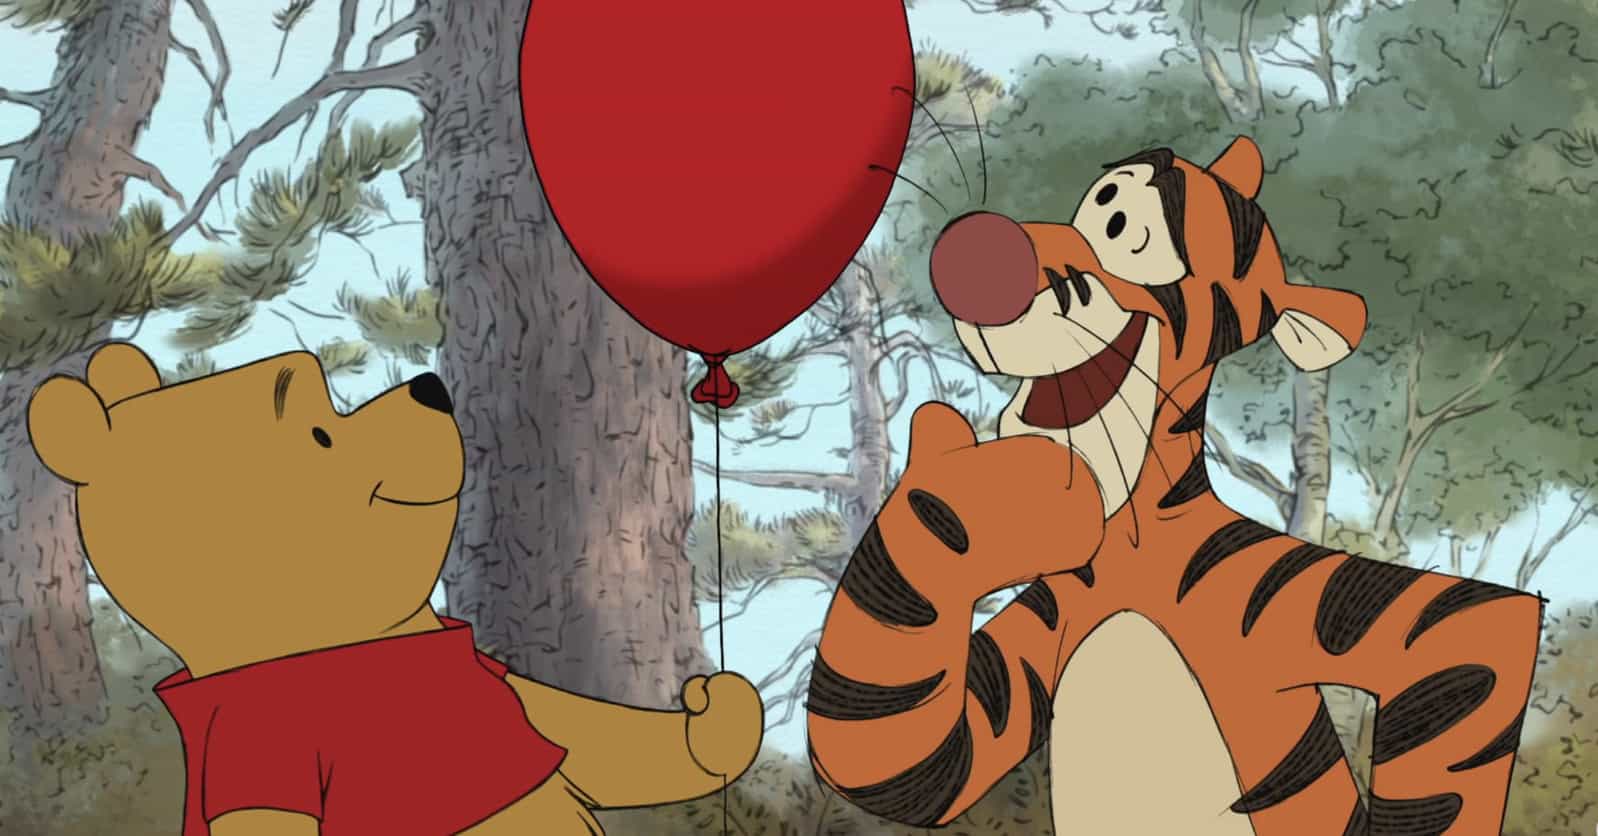 'Winnie the Pooh' Movies To Watch When You Need Something Wholesome